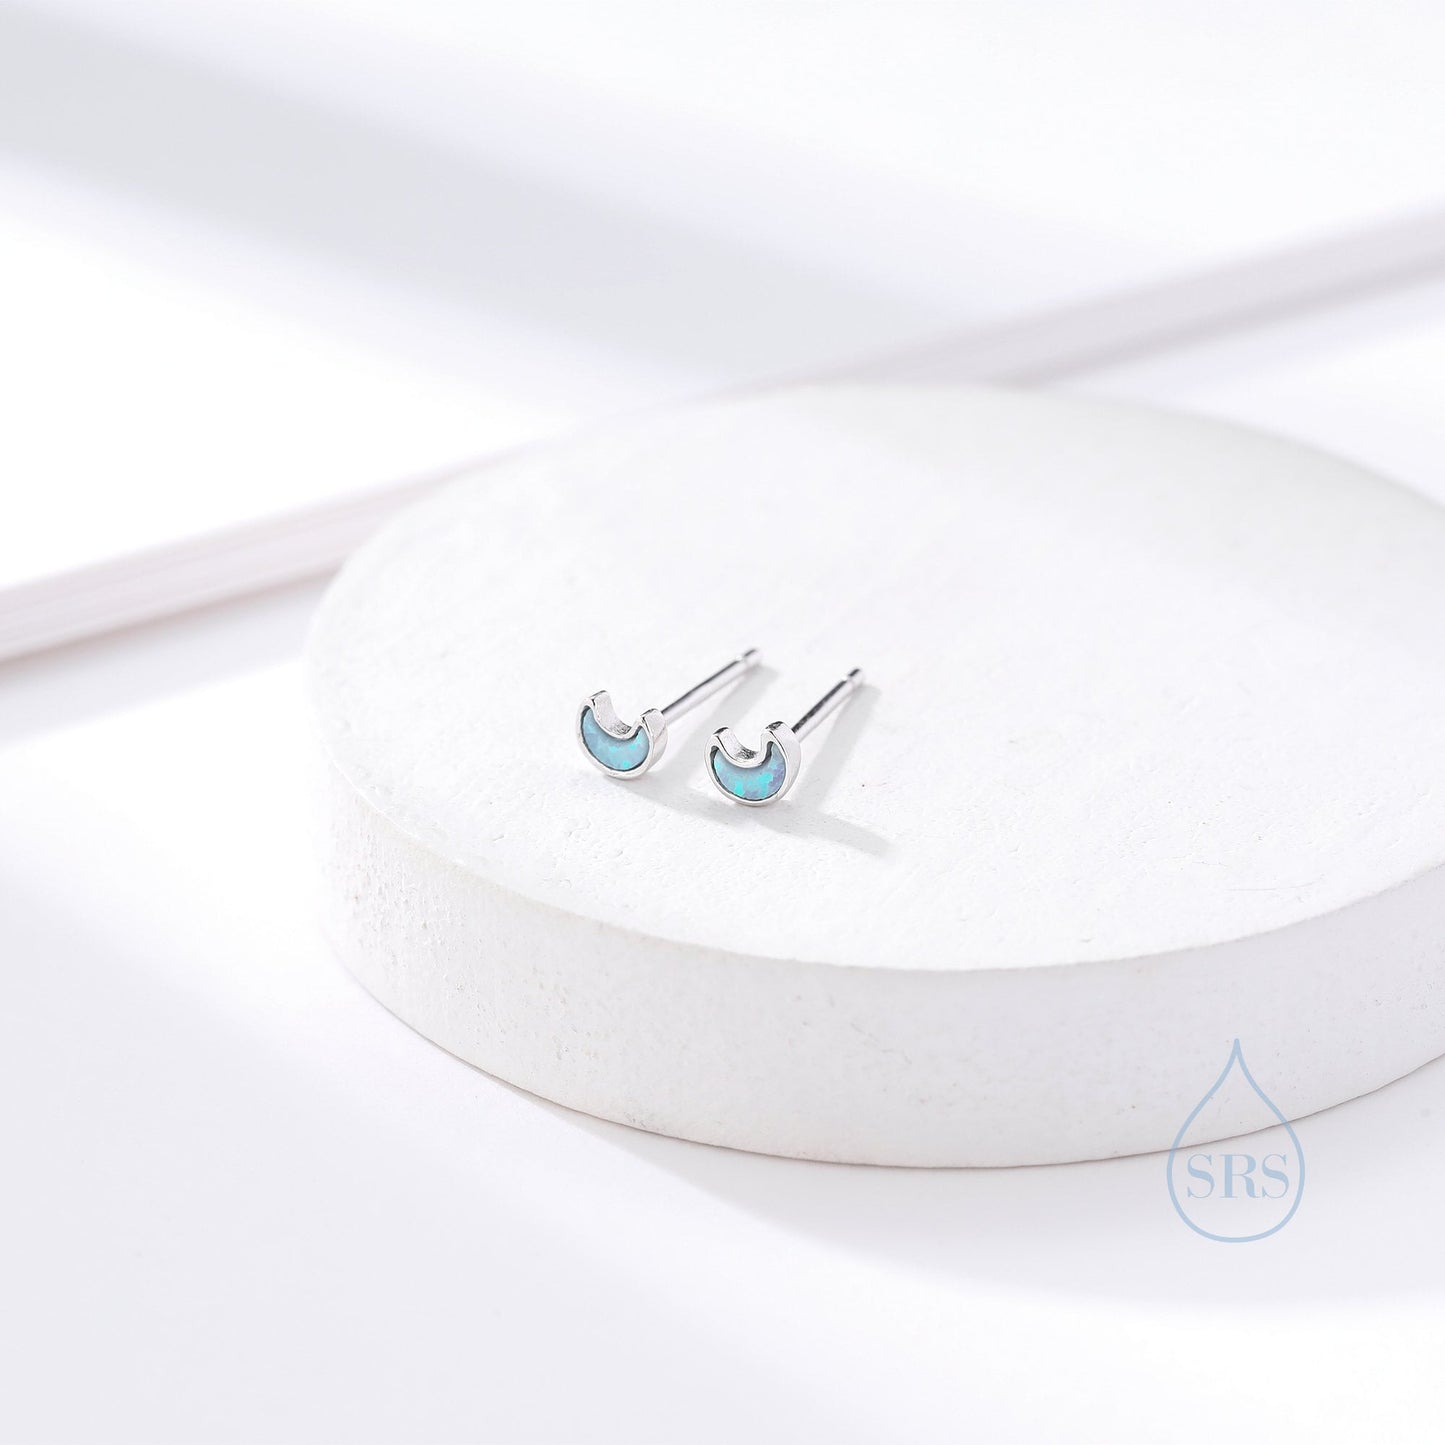 Extra Tiny Opal Moon Stud Earrings in Sterling Silver - Blue Opal or White Opal - Gold or Silver - New Moon Earrings - Petite Stud Earrings